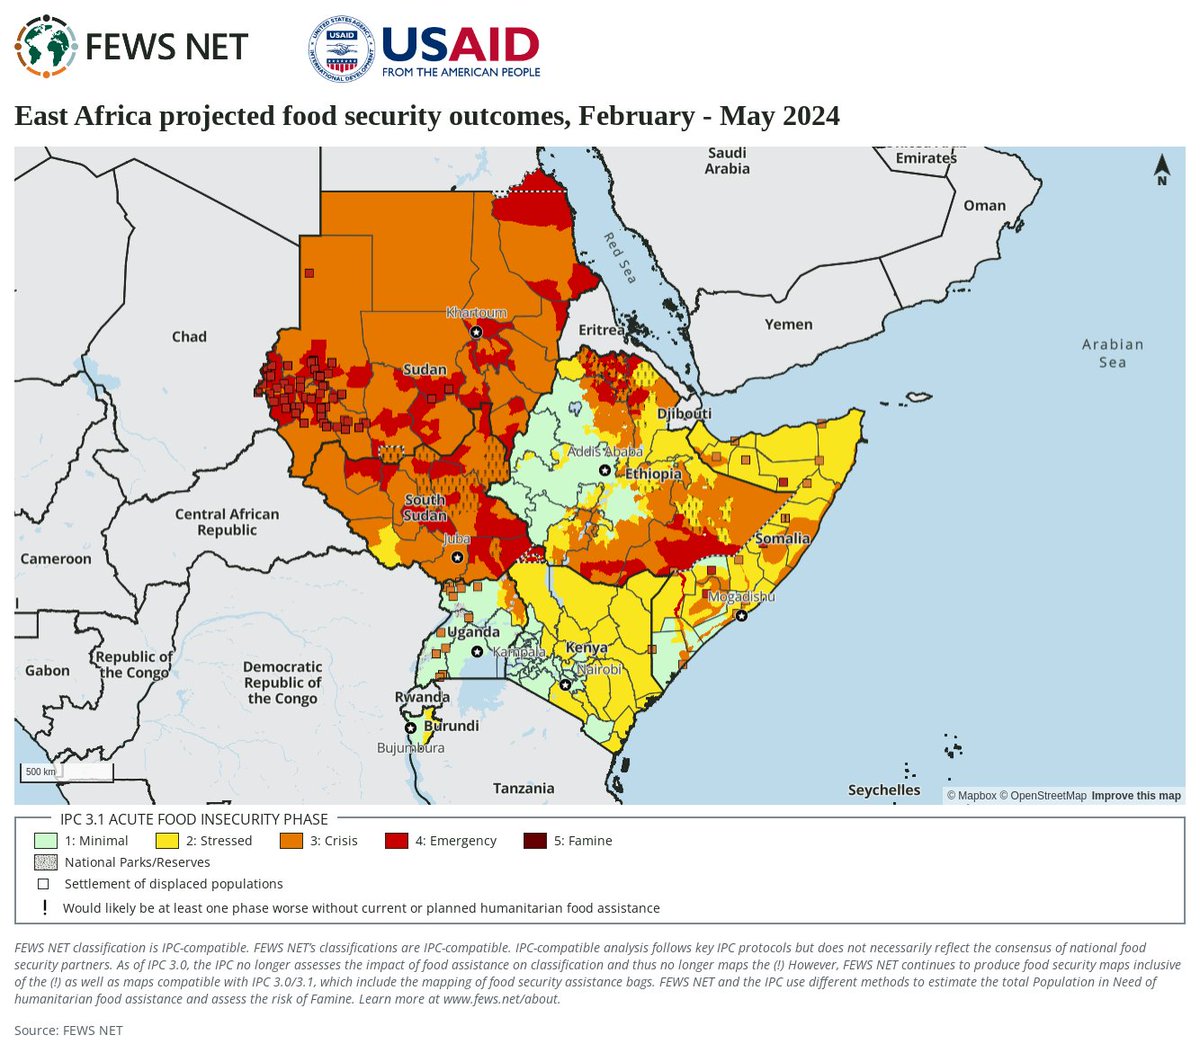 Conflict, high prices, and below-average harvests are driving increased humanitarian needs in #EastAfrica ow.ly/lj2A50Rbtp6